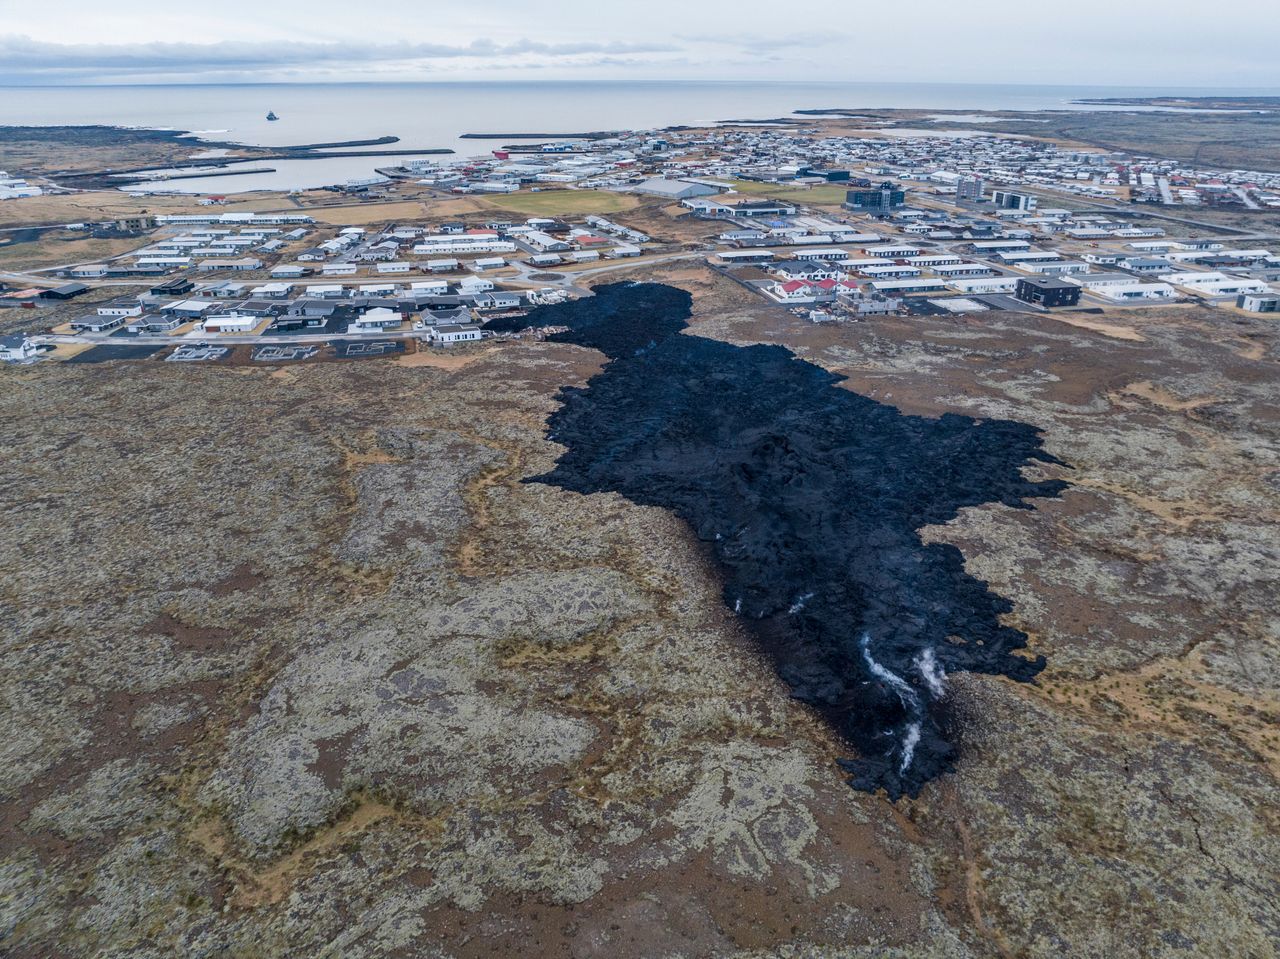 An aerial view of the lava field with inactive southern fissure next to the town.